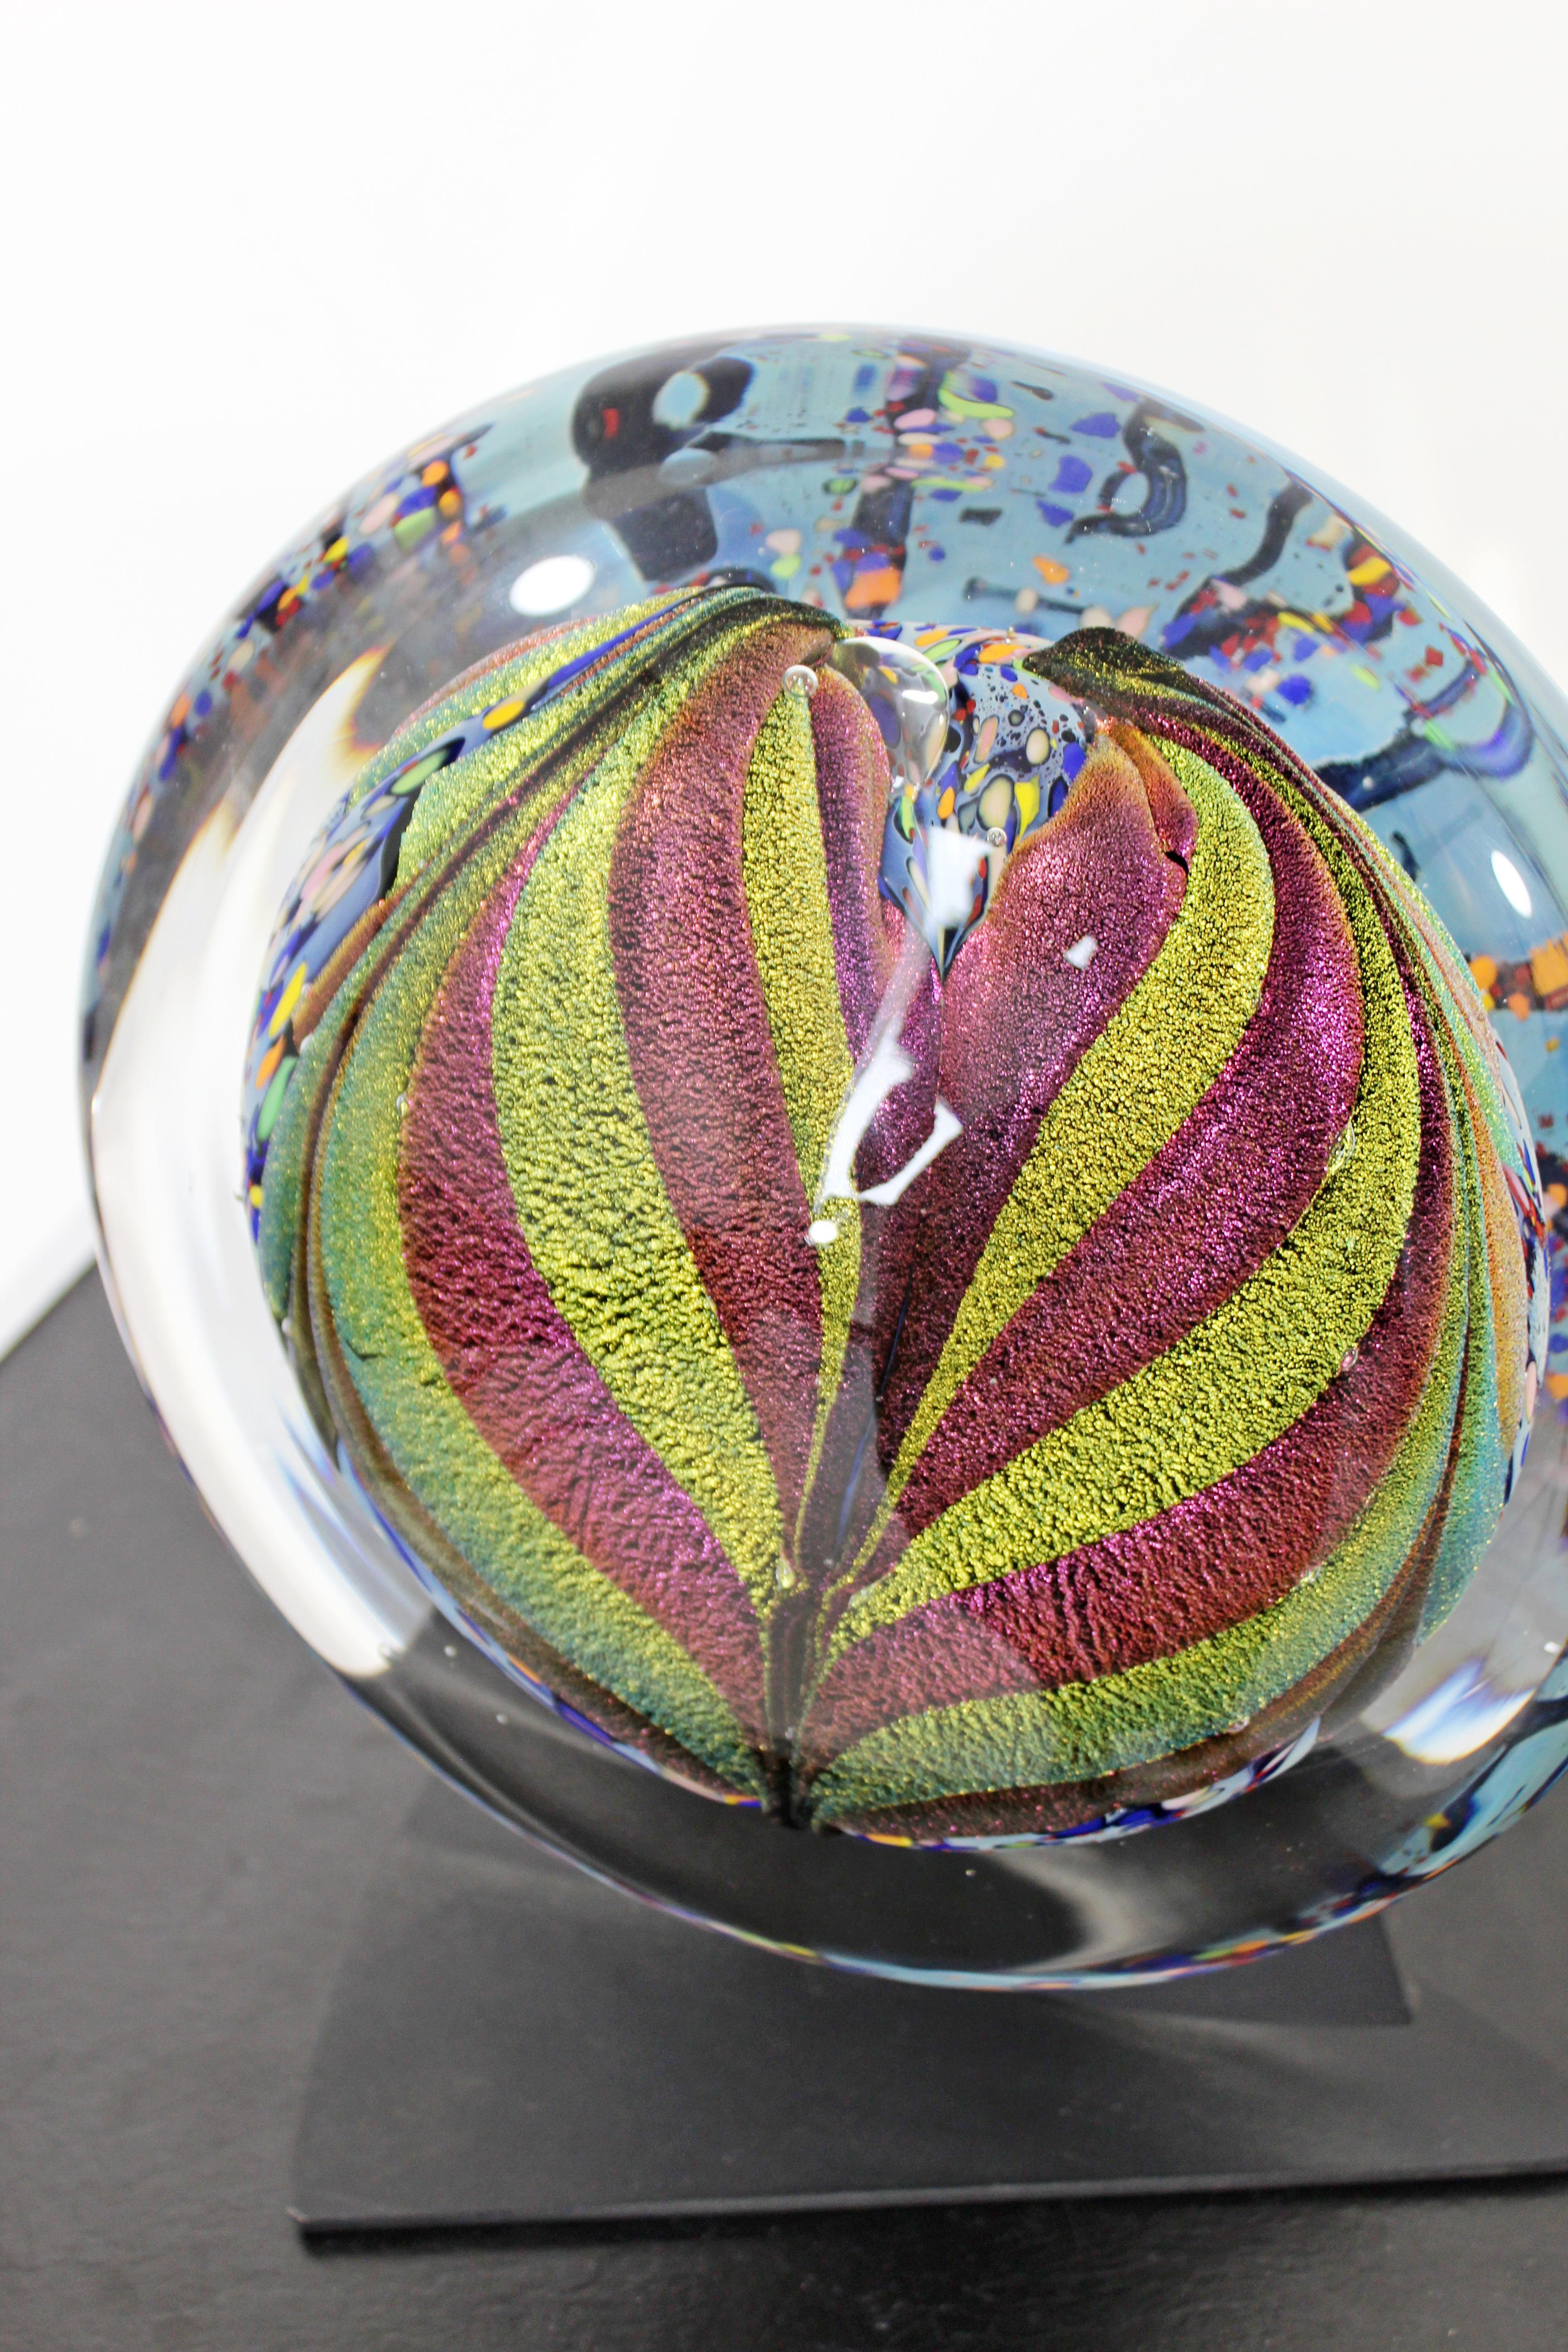 For your consideration is a fabulous piece of glass art on a black metal base, with a tulip shaped design, signed on the bottom of the glass by Rollin Karg, dated 2002. In excellent condition. The dimensions of the glass are 11